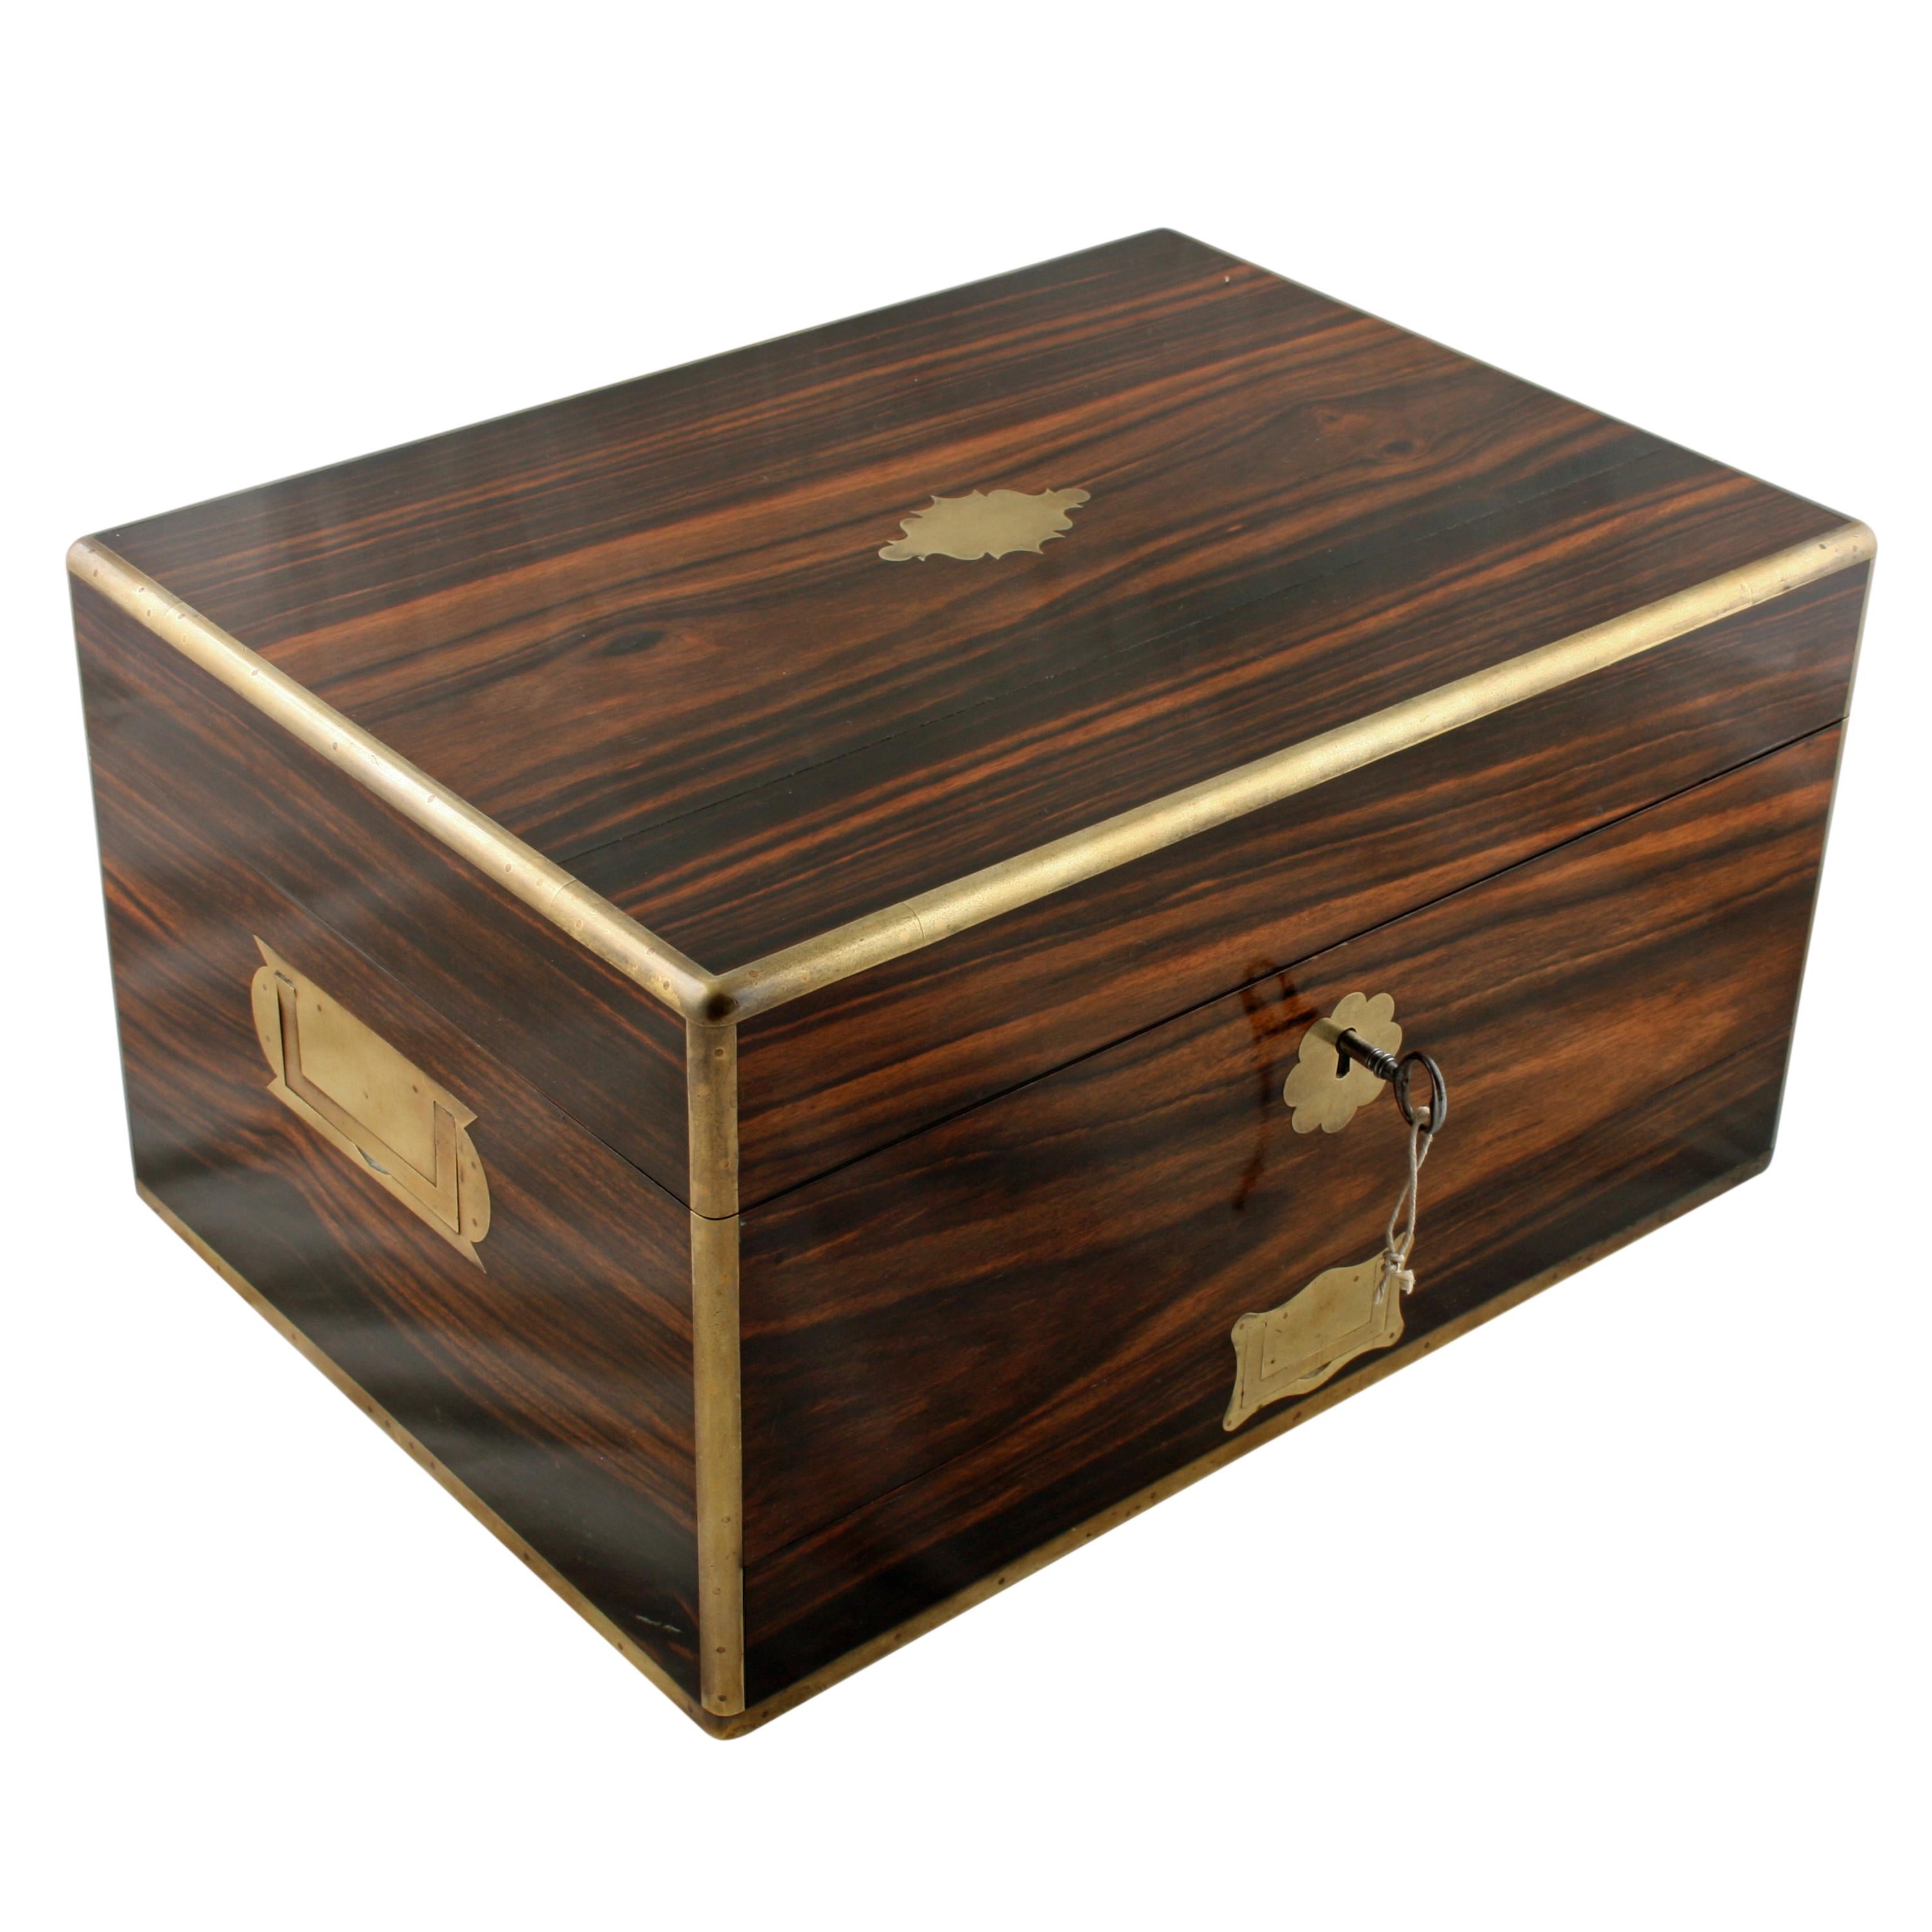 Coromandel wood jewel or dressing box

 

A fine quality mid-19th century Victorian coromandel wood veneered jewel or dressing box.

The interior is fitted out with blue leather and holds eleven sterling silver top bottles and jars and a